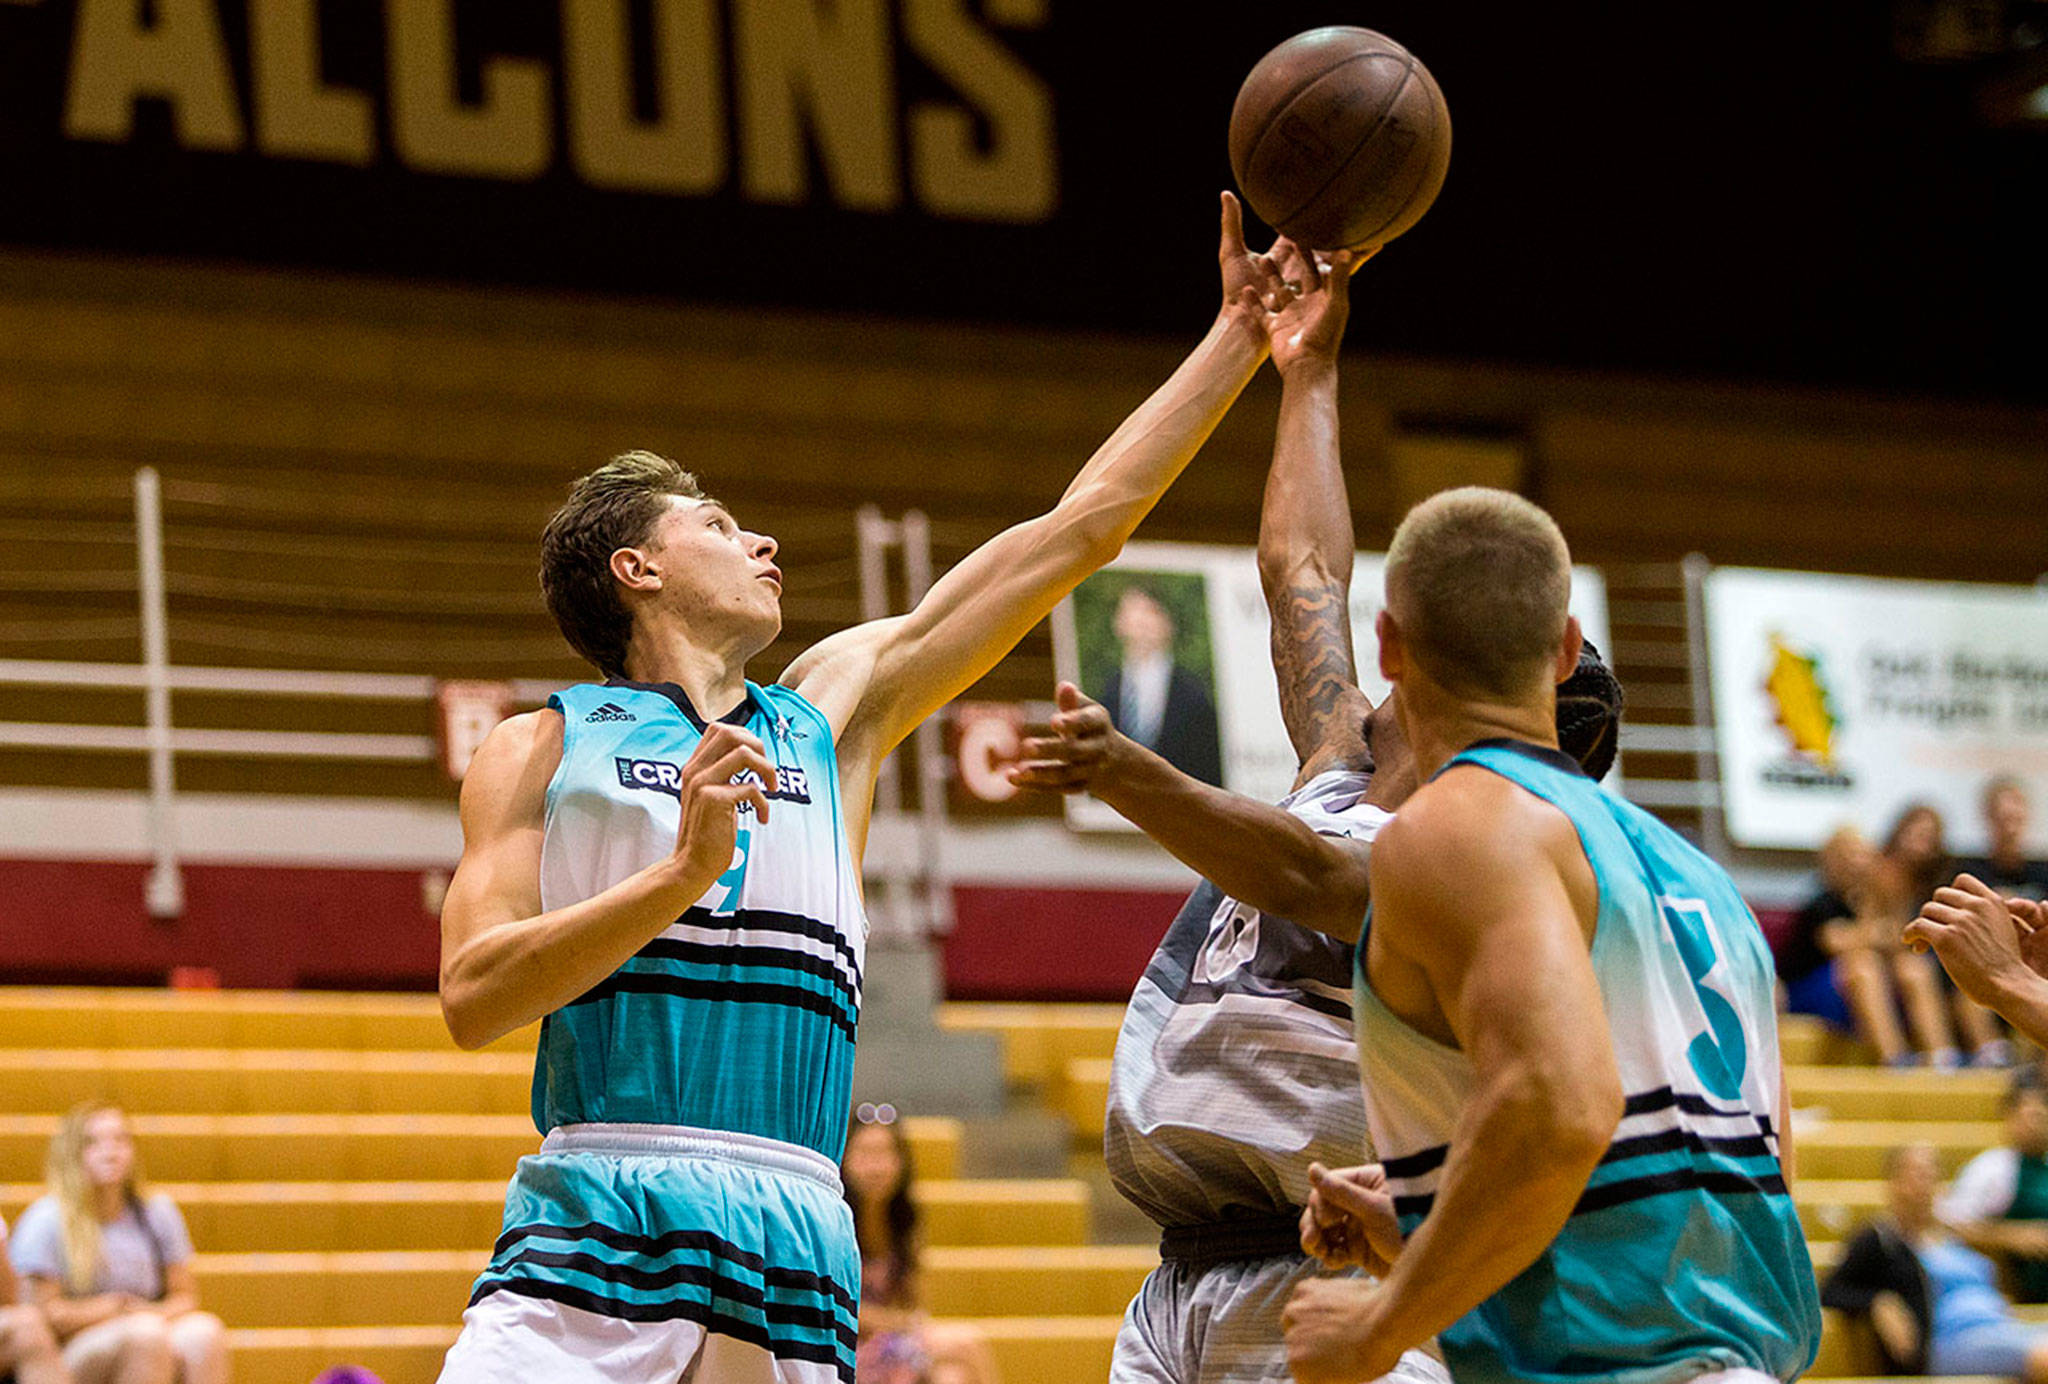 Former Monroe High School basketball star Colby Kyle gave up select soccer in ninth grade to focus on hoops. Kyle, pictured during “The Crawsover” pro-am league last summer, is now a sophomore on the Princeton University men’s basketball team. (Olivia Vanni / The Herald)